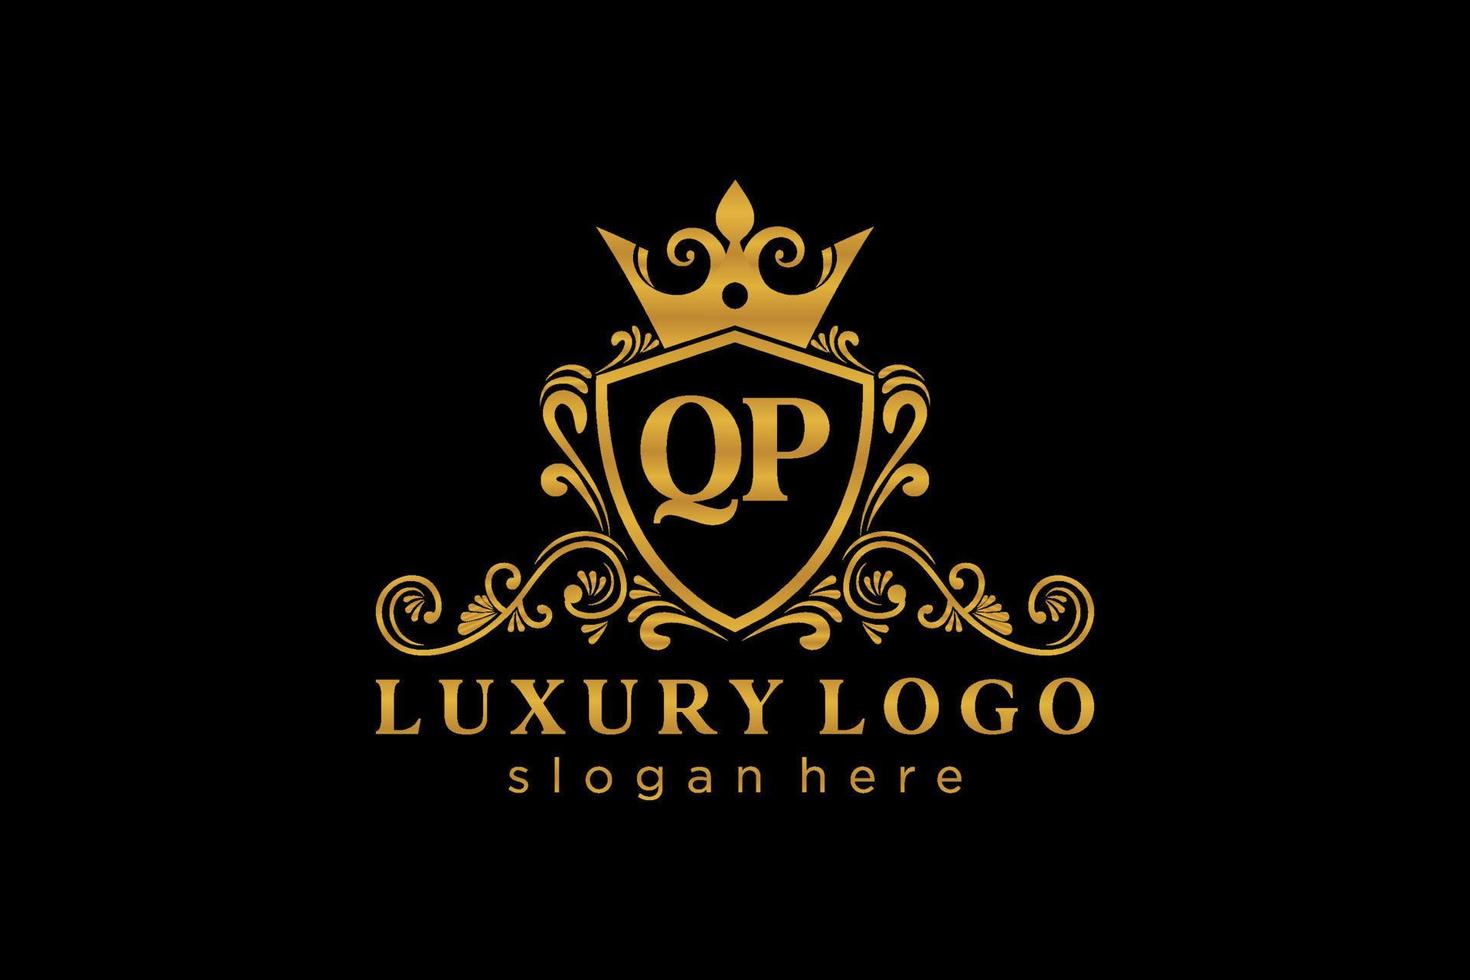 Initial QP Letter Royal Luxury Logo template in vector art for Restaurant, Royalty, Boutique, Cafe, Hotel, Heraldic, Jewelry, Fashion and other vector illustration.